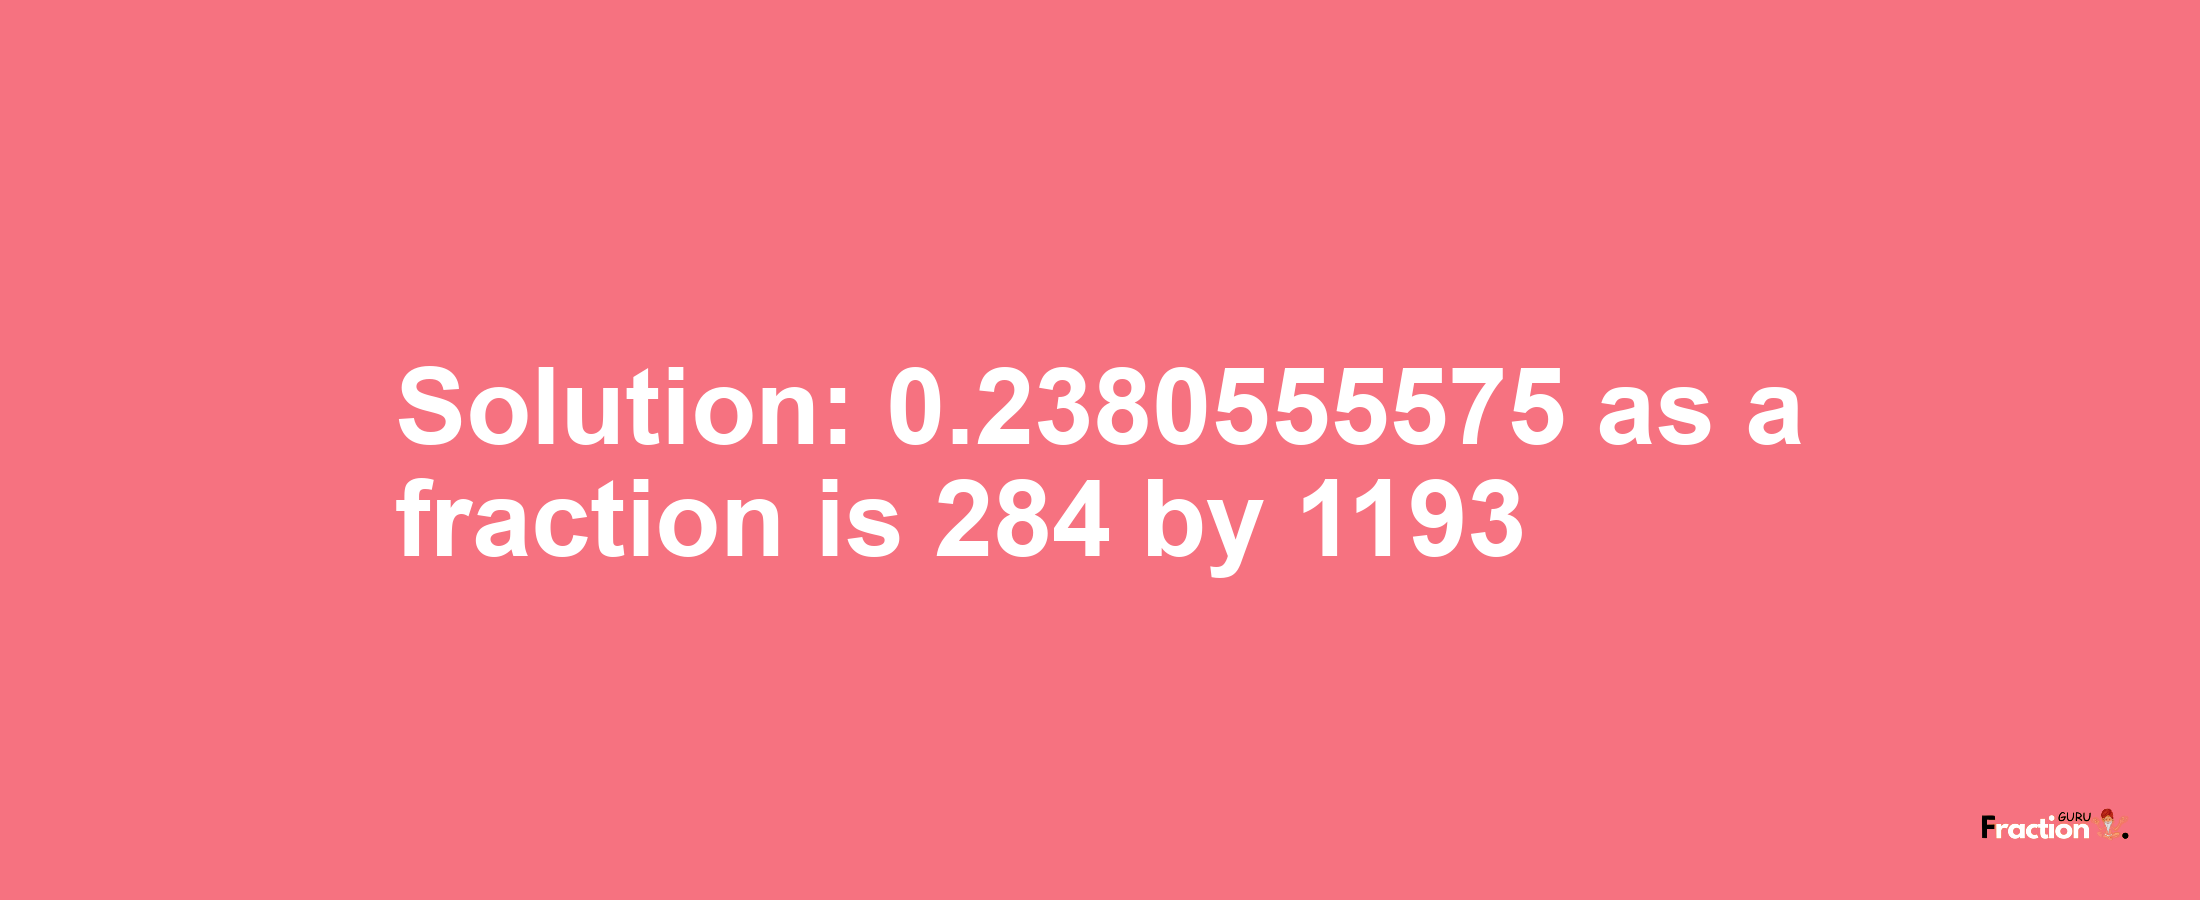 Solution:0.2380555575 as a fraction is 284/1193